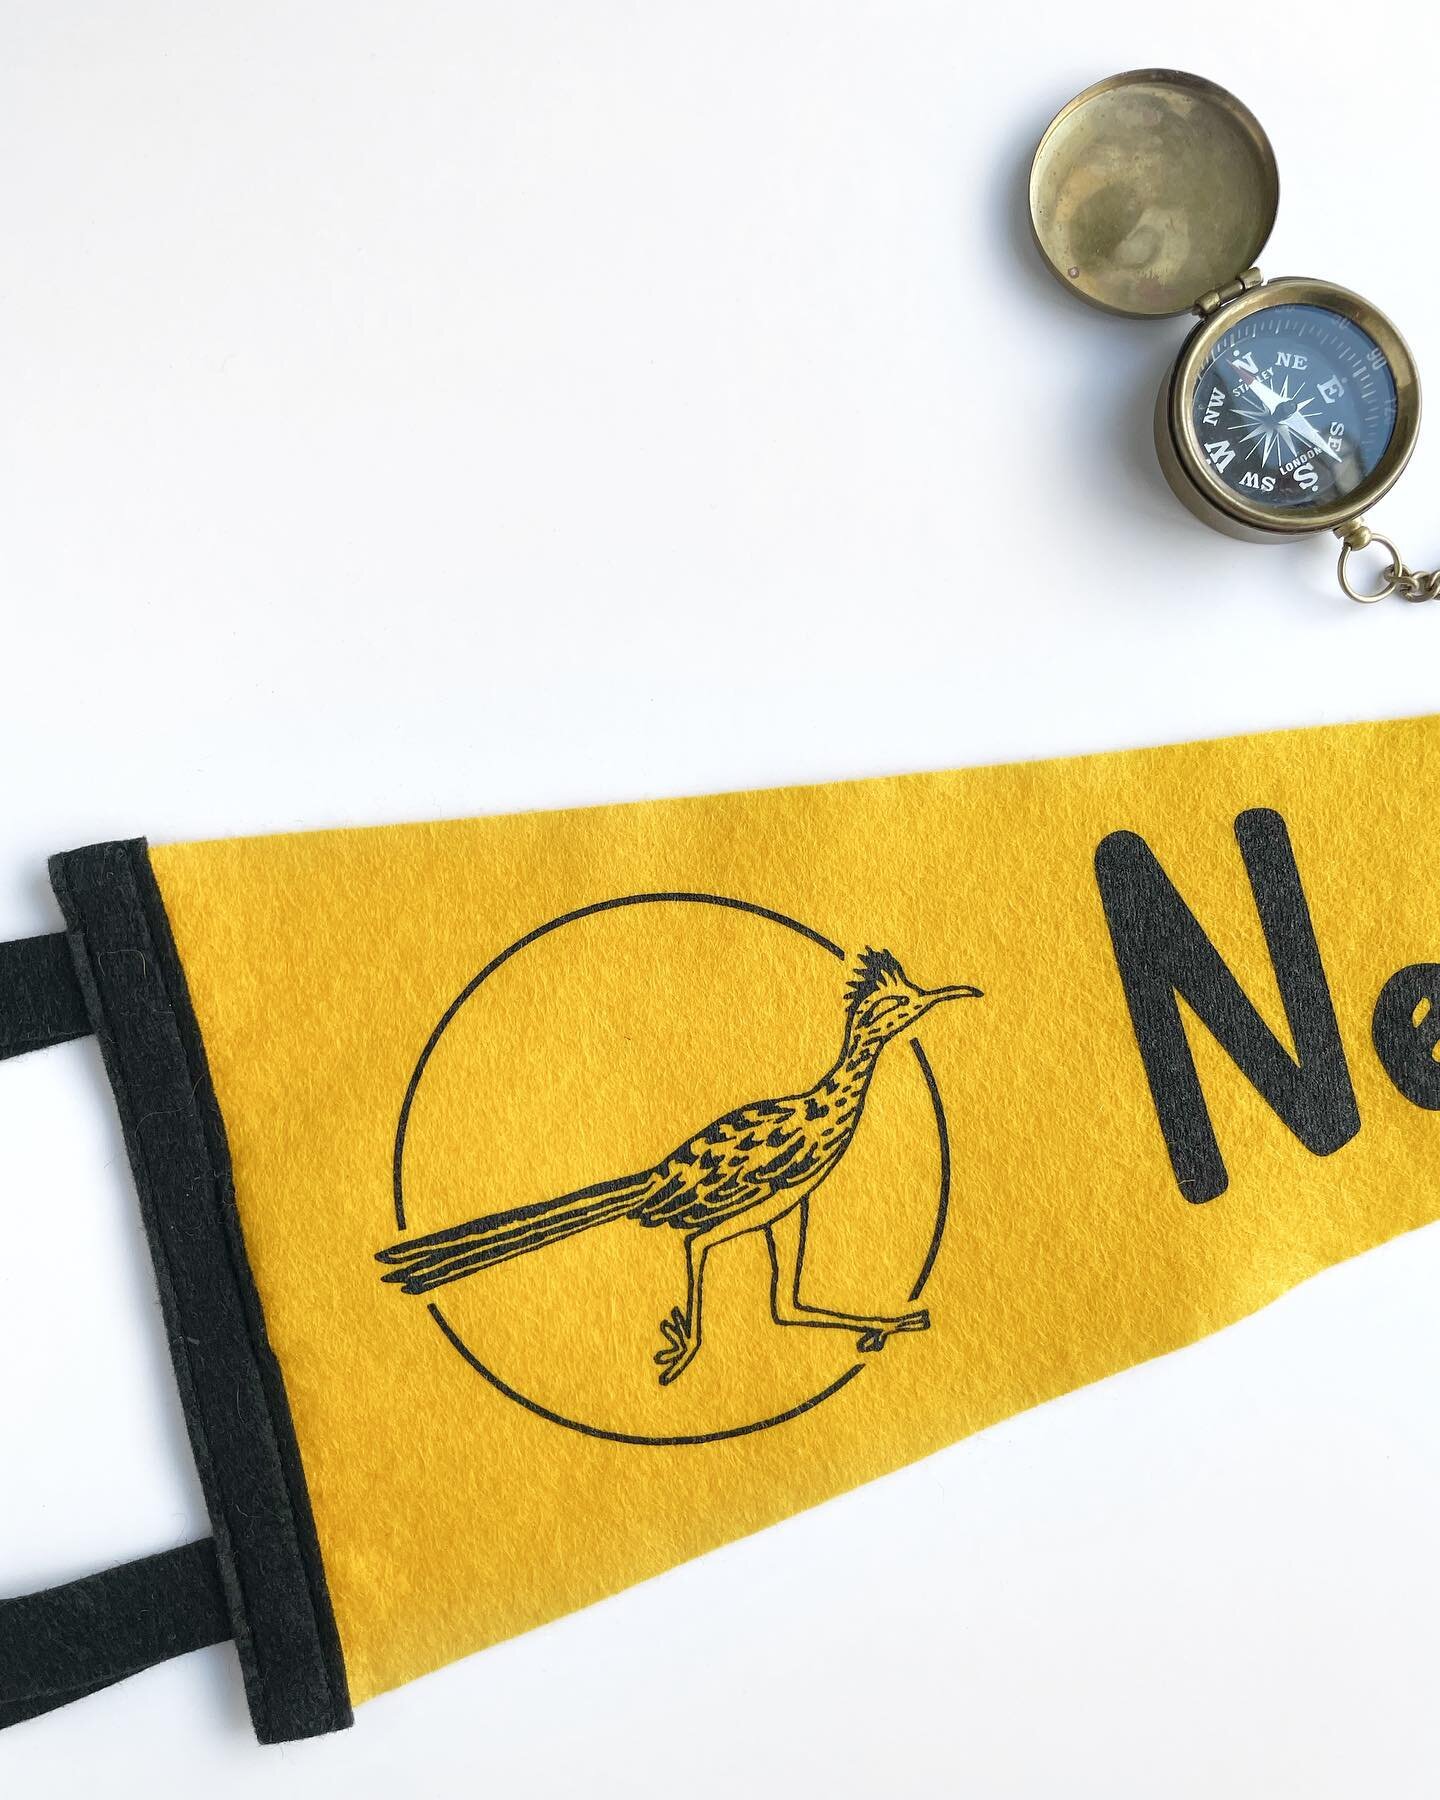 ✨NEW✨ The Roadrunner New Mexico pennant - in beautiful golden-yellow wool felt, designed by me and made here in America by the wizards over at @oxfordpennant!

Where are my New Mexico folks at? What&rsquo;s your top NM hiking spot?

&hellip;

#newmex